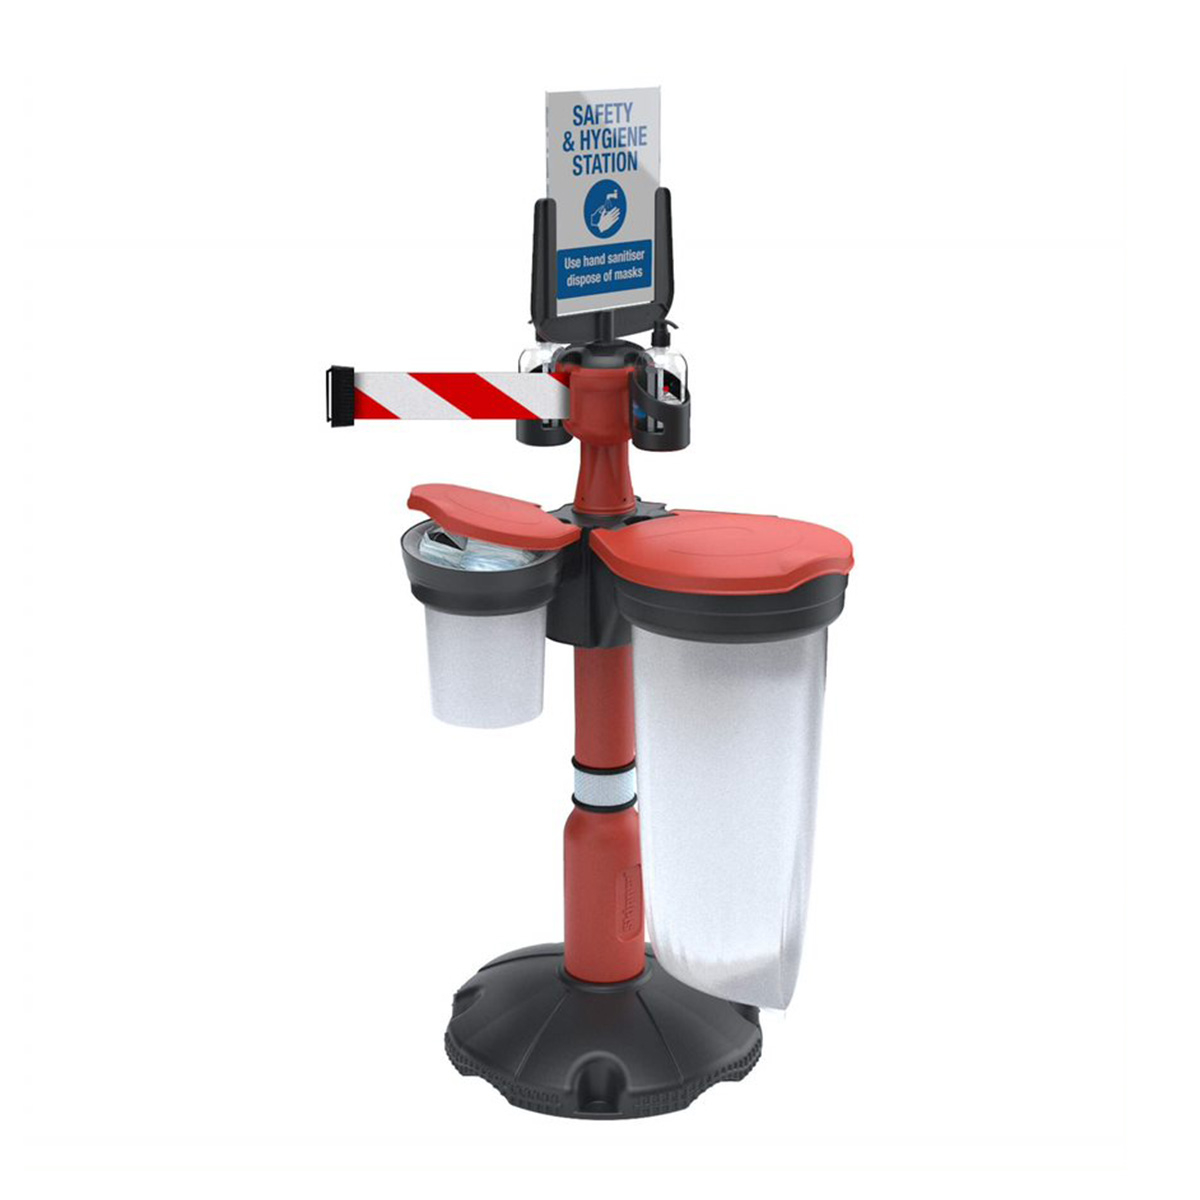 Skipper™ Safety Station 3 With Retracting Belt in Red - Includes A4 Sign Holder For Displaying Safety Information